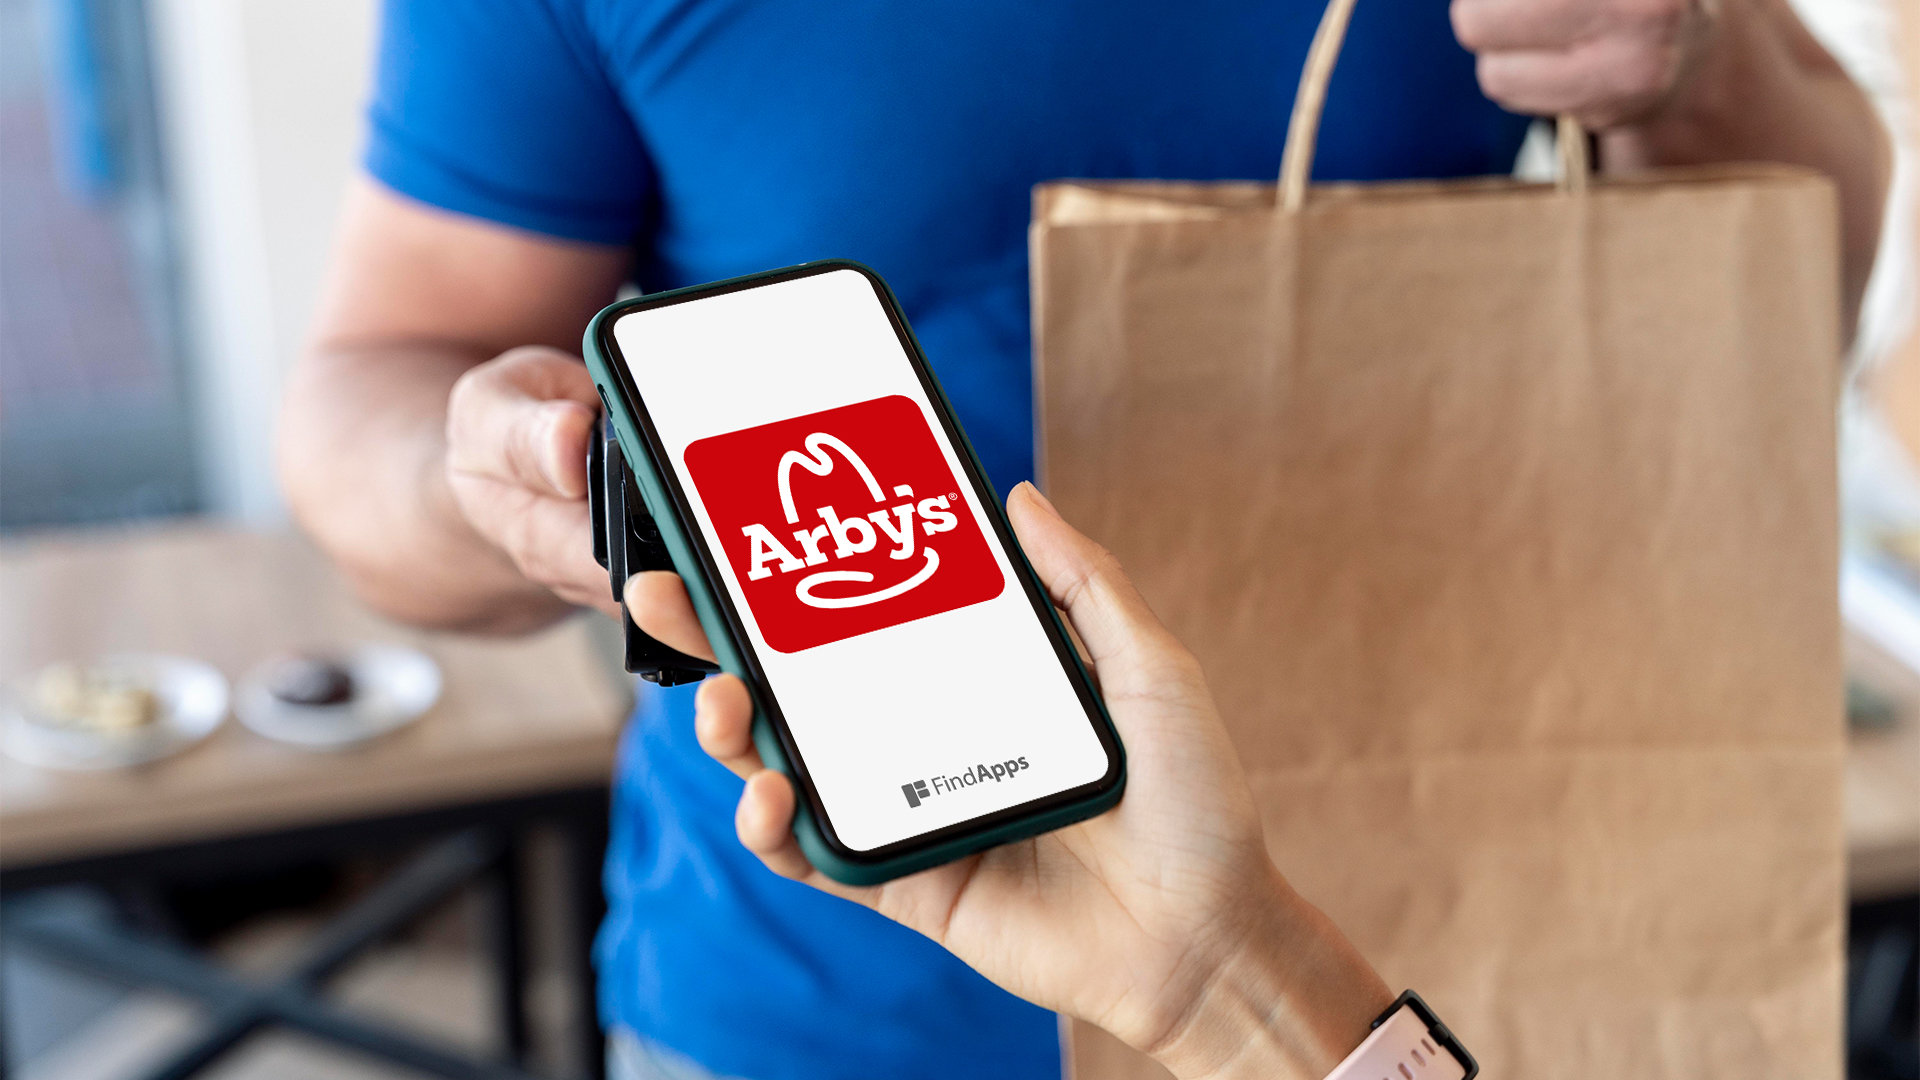 Arby's Fast Food Sandwiches app review